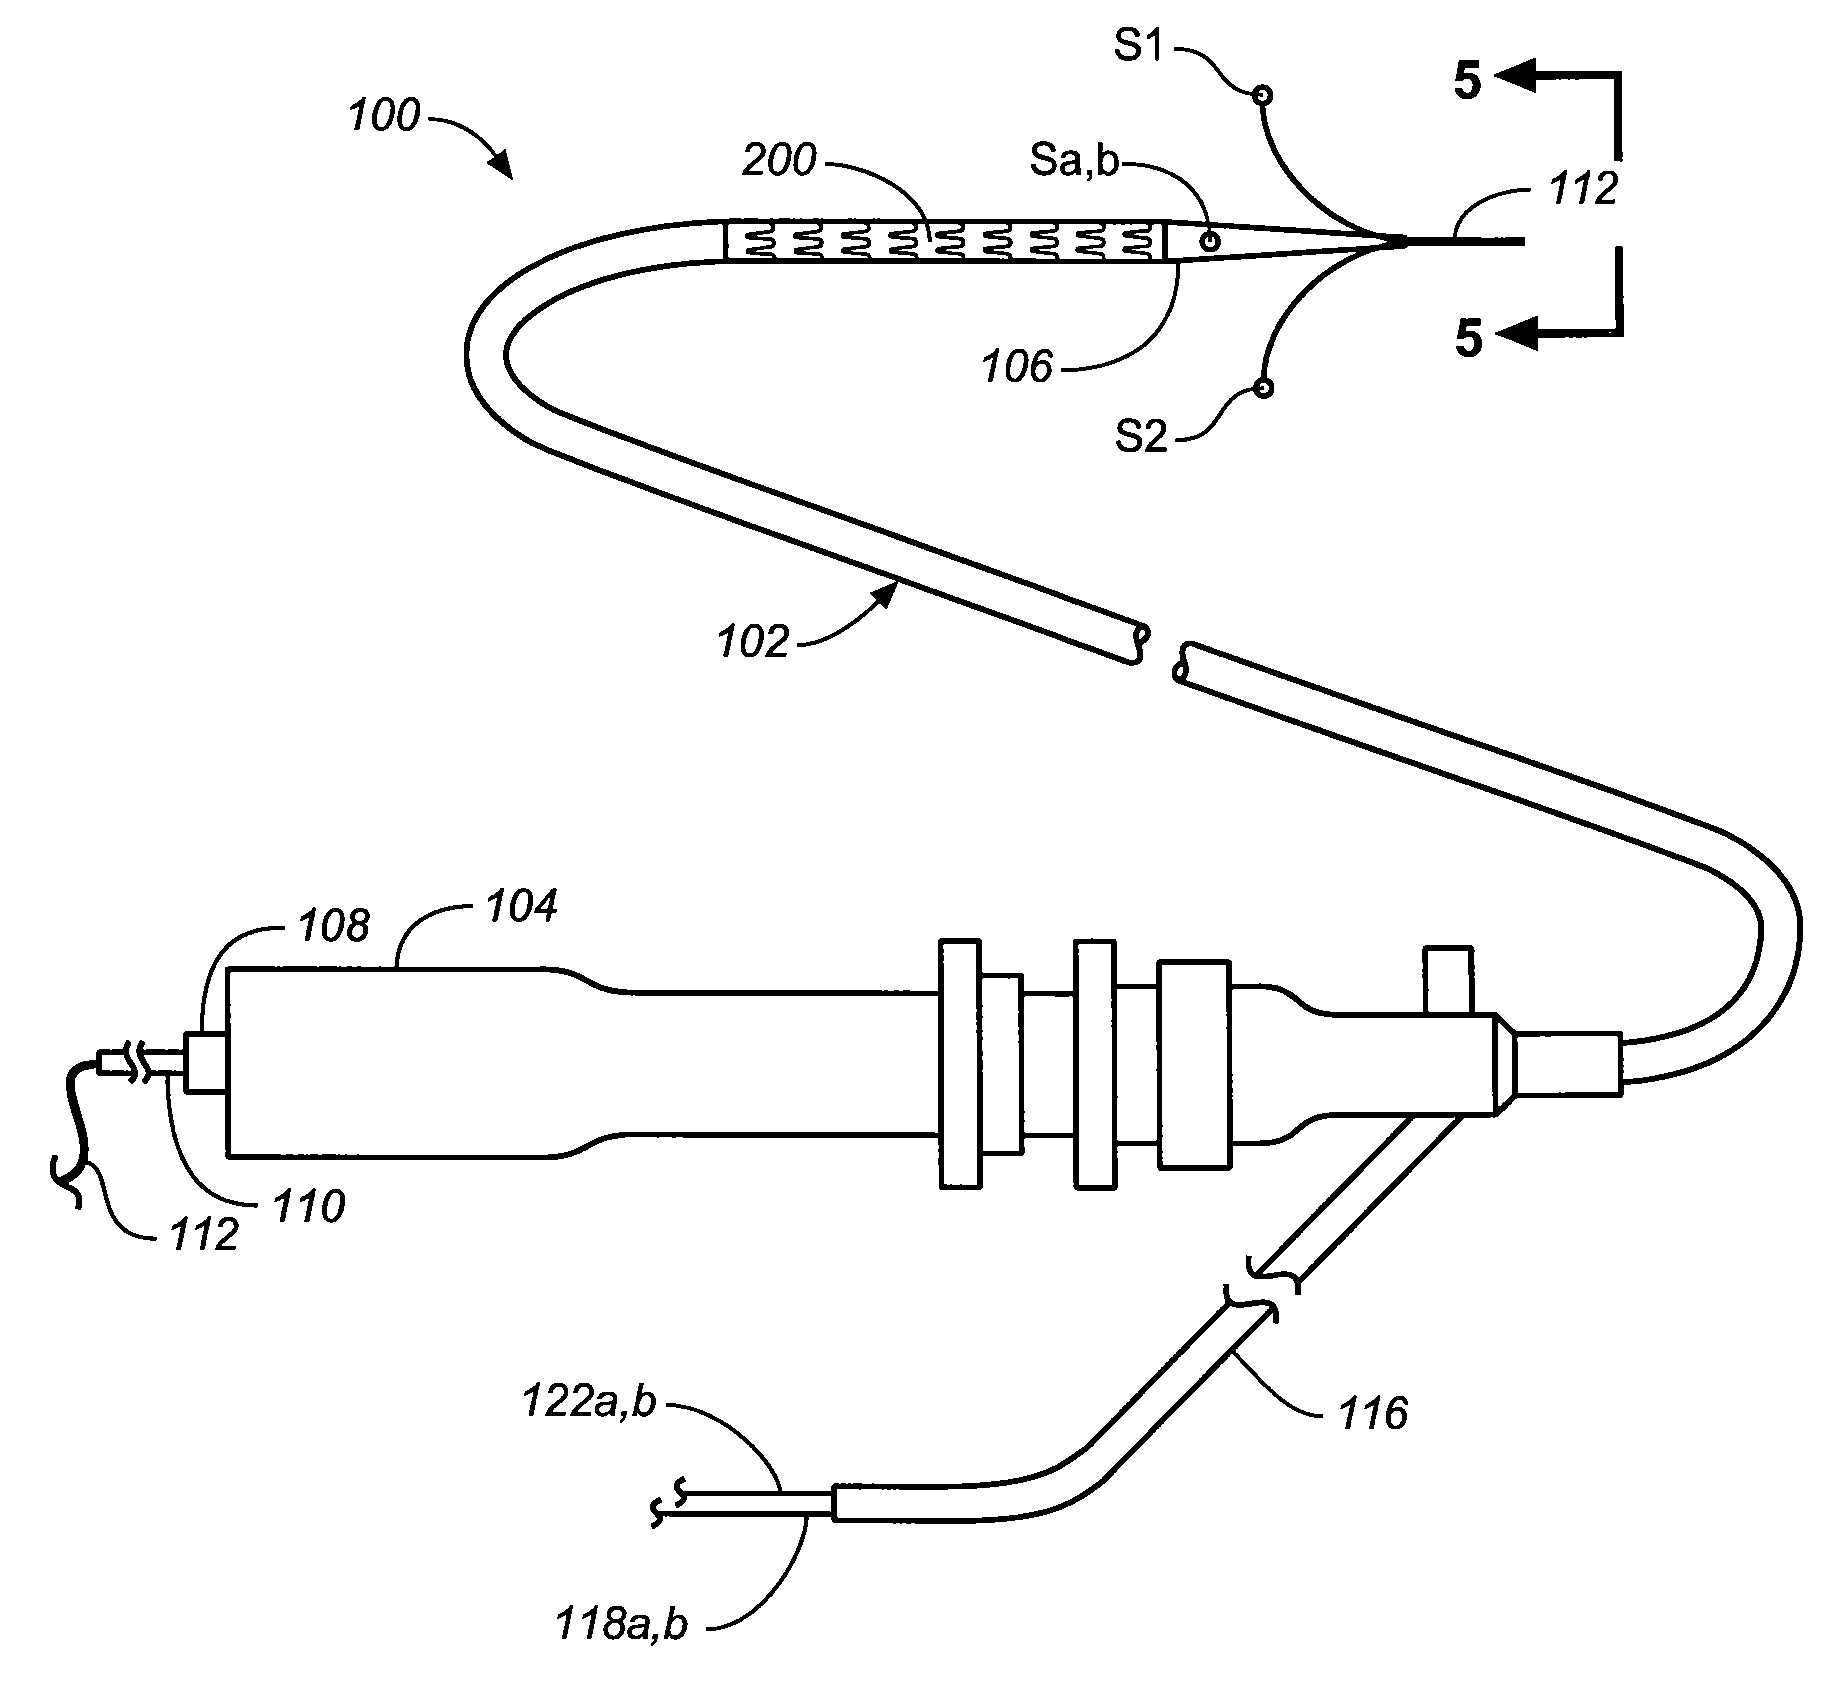 Vascular Position Locating and/or Mapping Apparatus and Methods